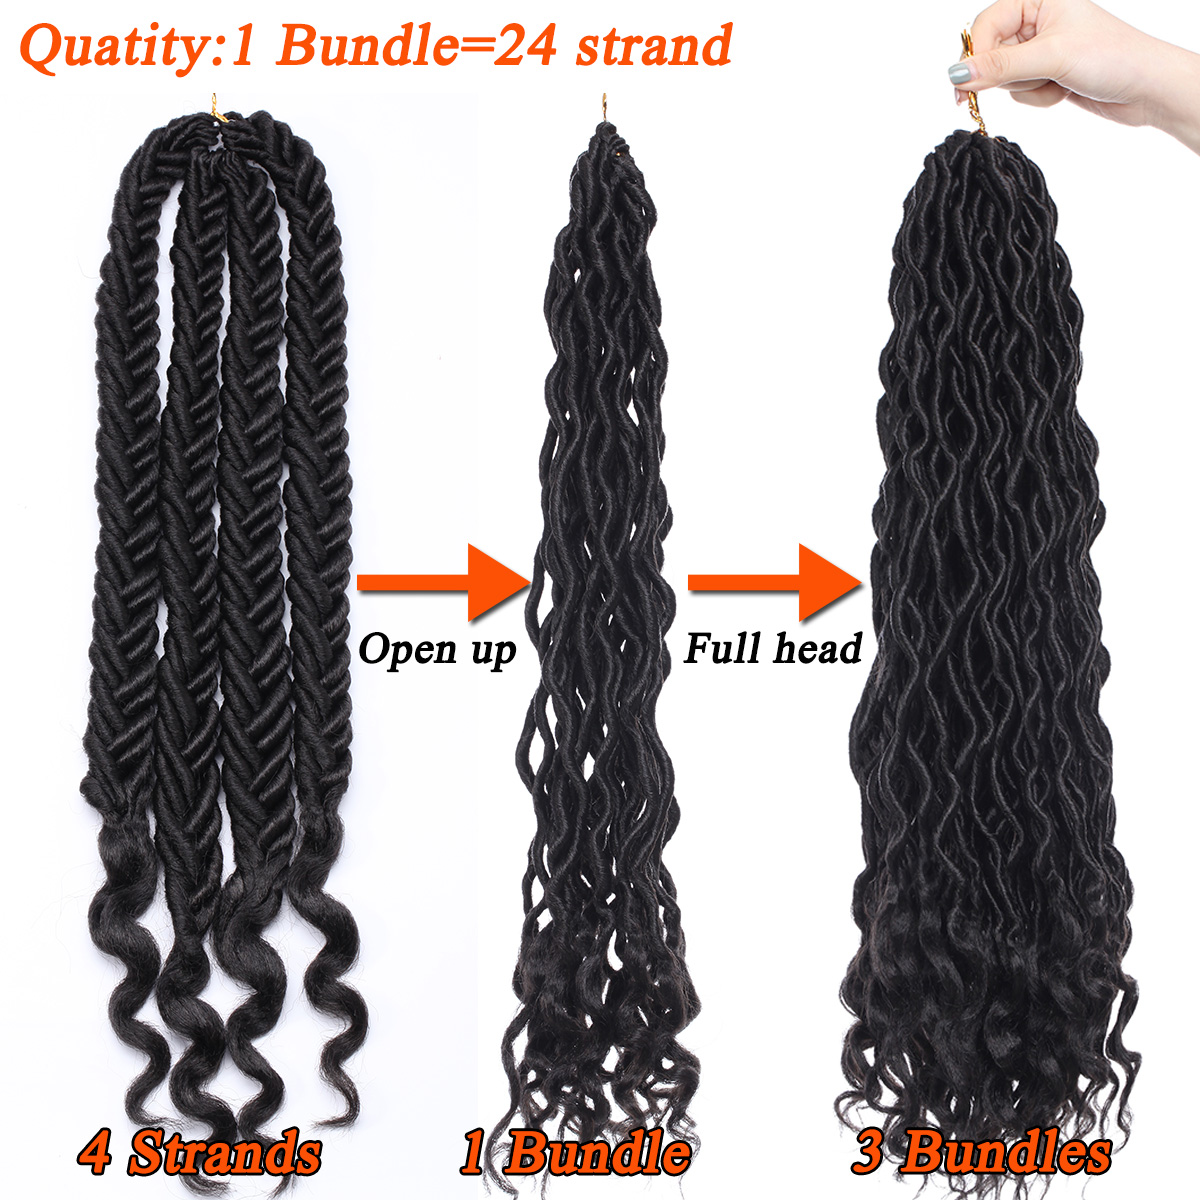 SEGO Faux Locs Crochet Braids Hair Synthetic Braiding Hair Real Soft Wave Curly Black Hair Extensions Ombre Dreadlocks Hairstyles - image 4 of 10